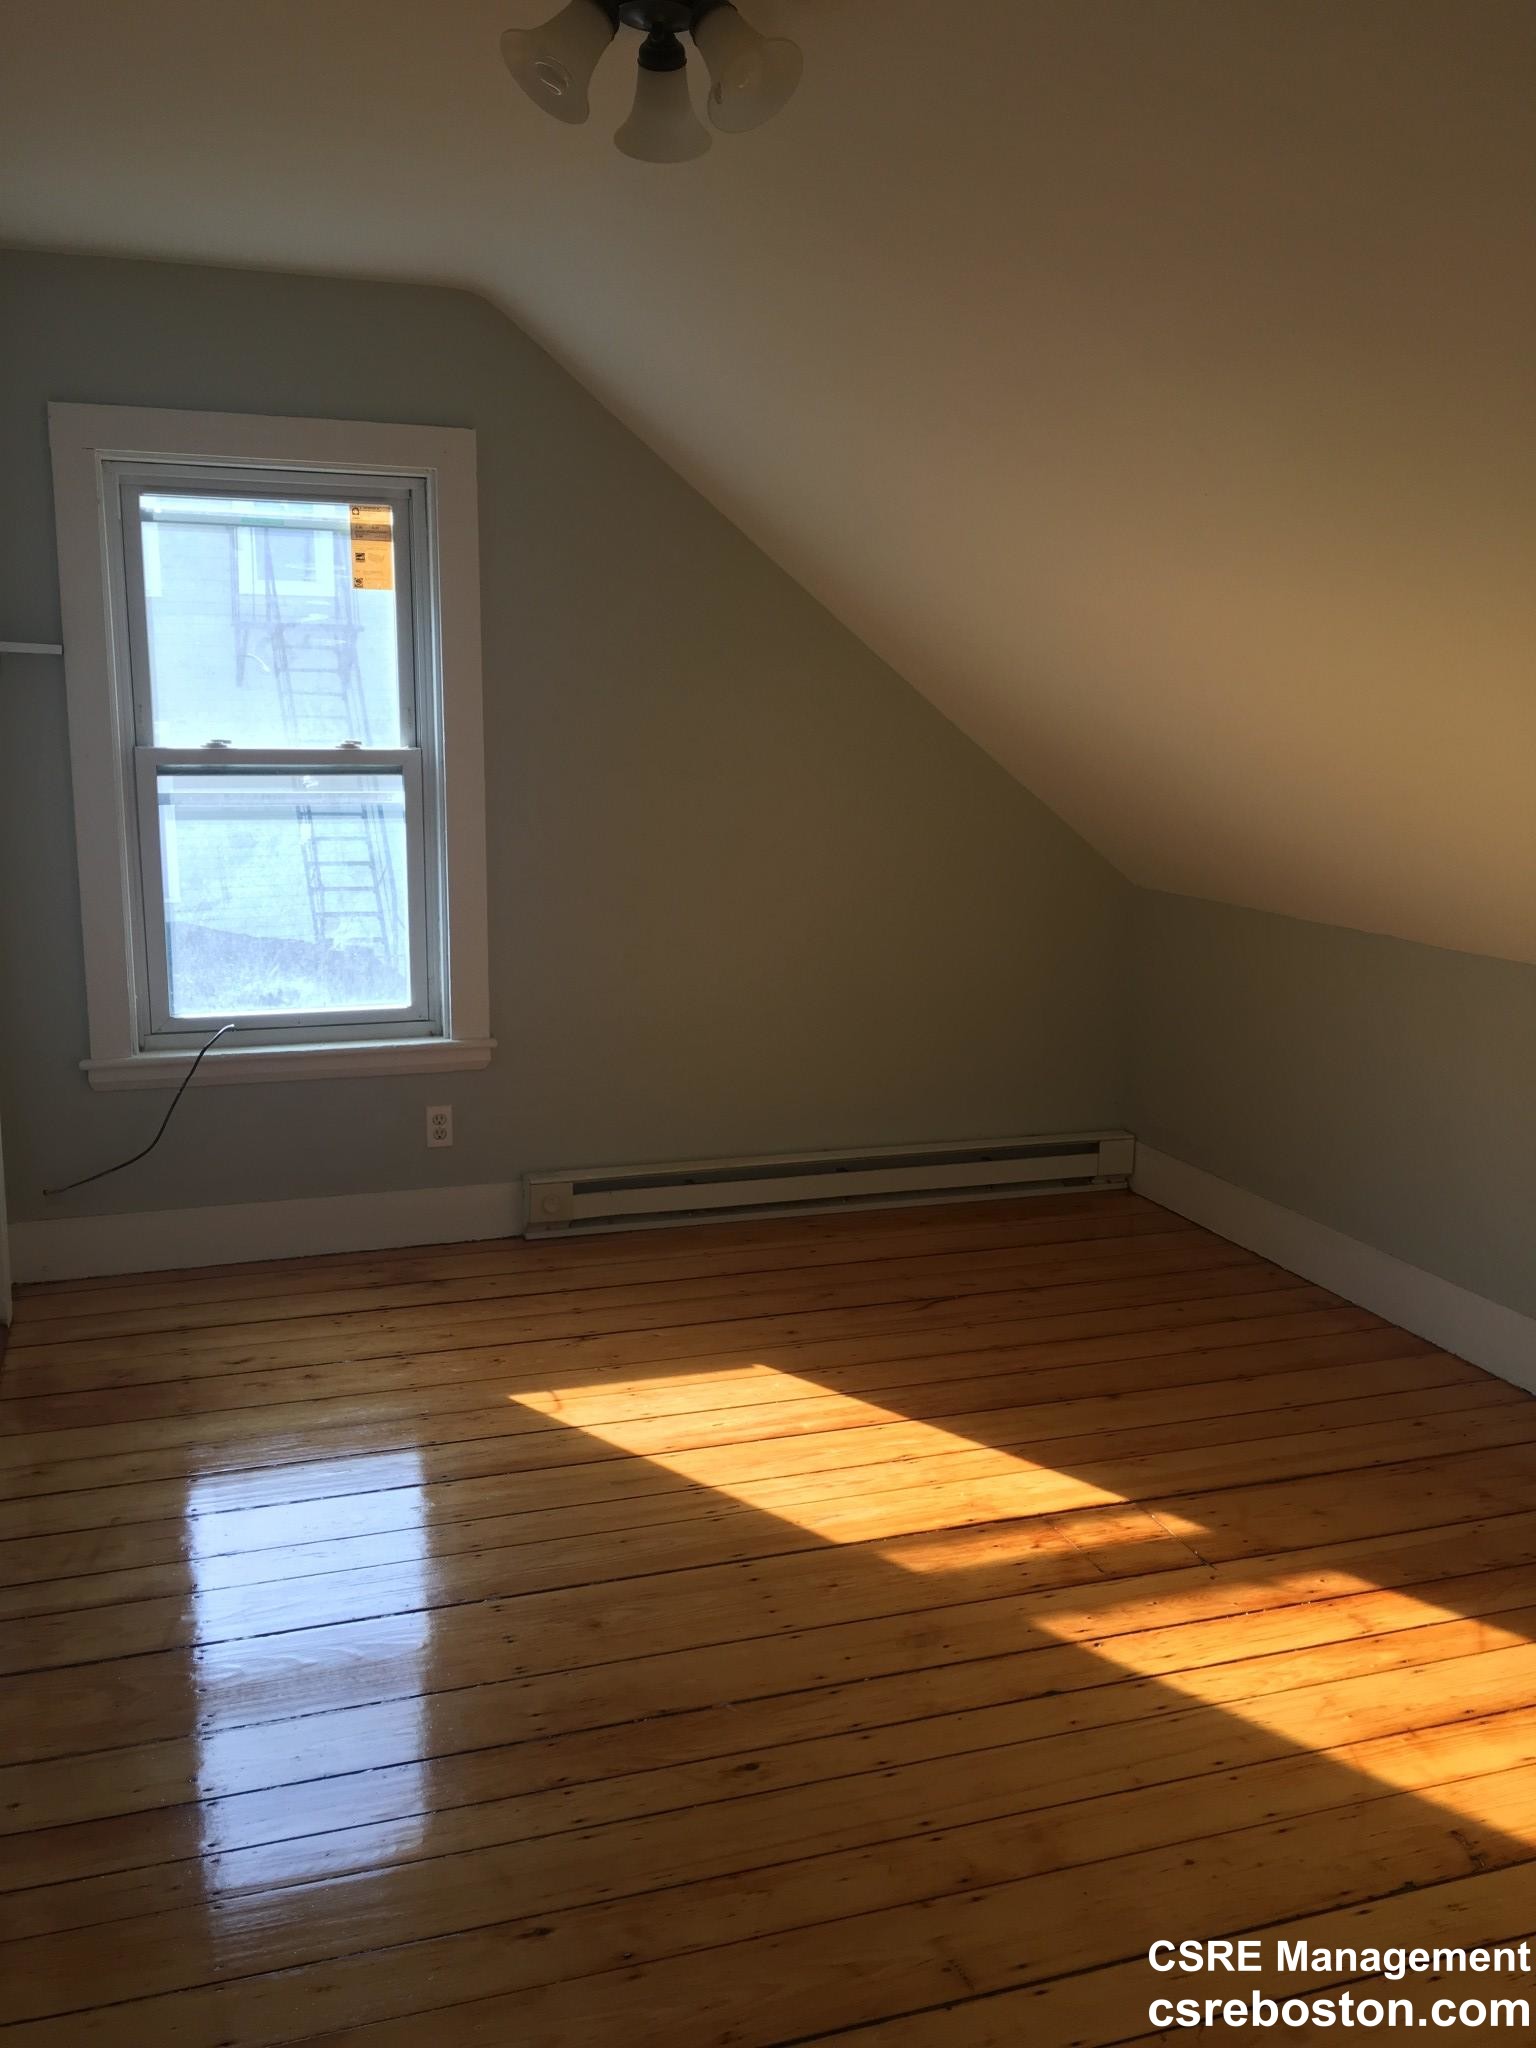 Photos of apartment on Saunders St.,Boston MA 02134